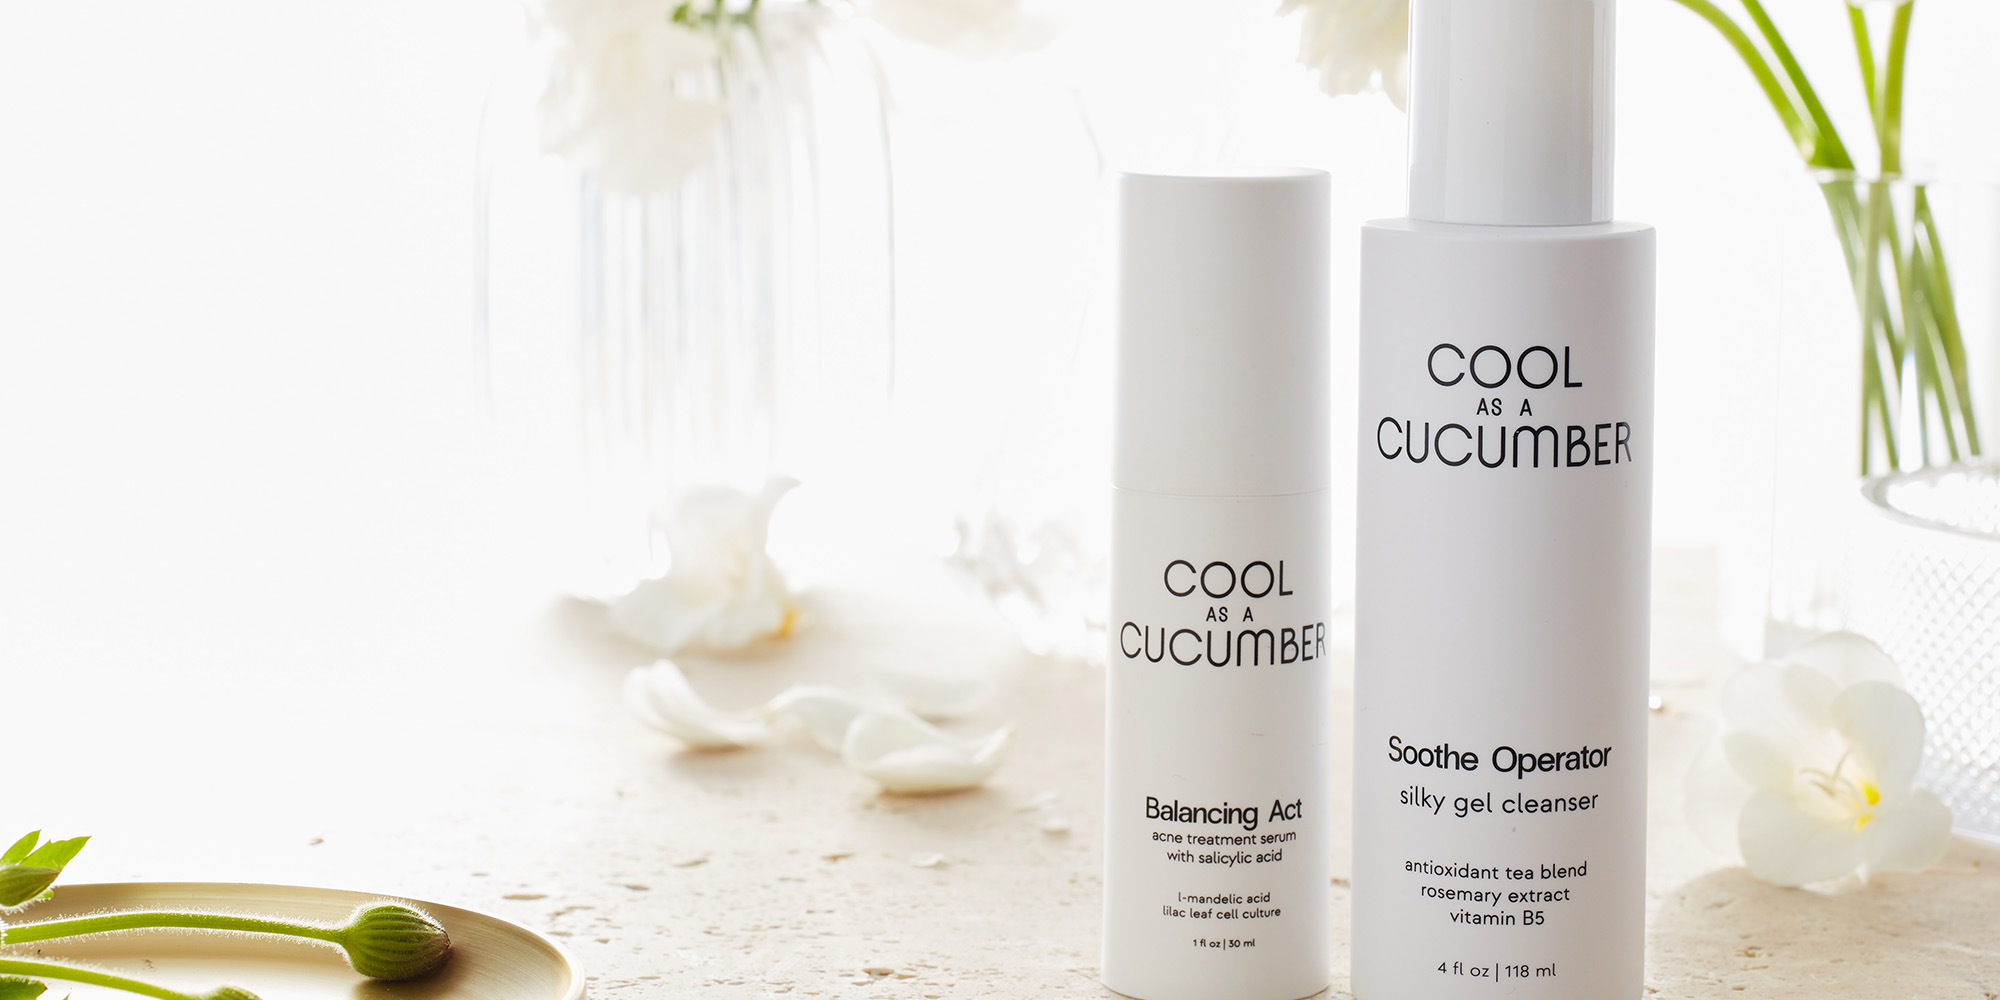 New Brand Cool As A Cucumber Wants To Ease The Mental And Physical Burden Of Adult Acne